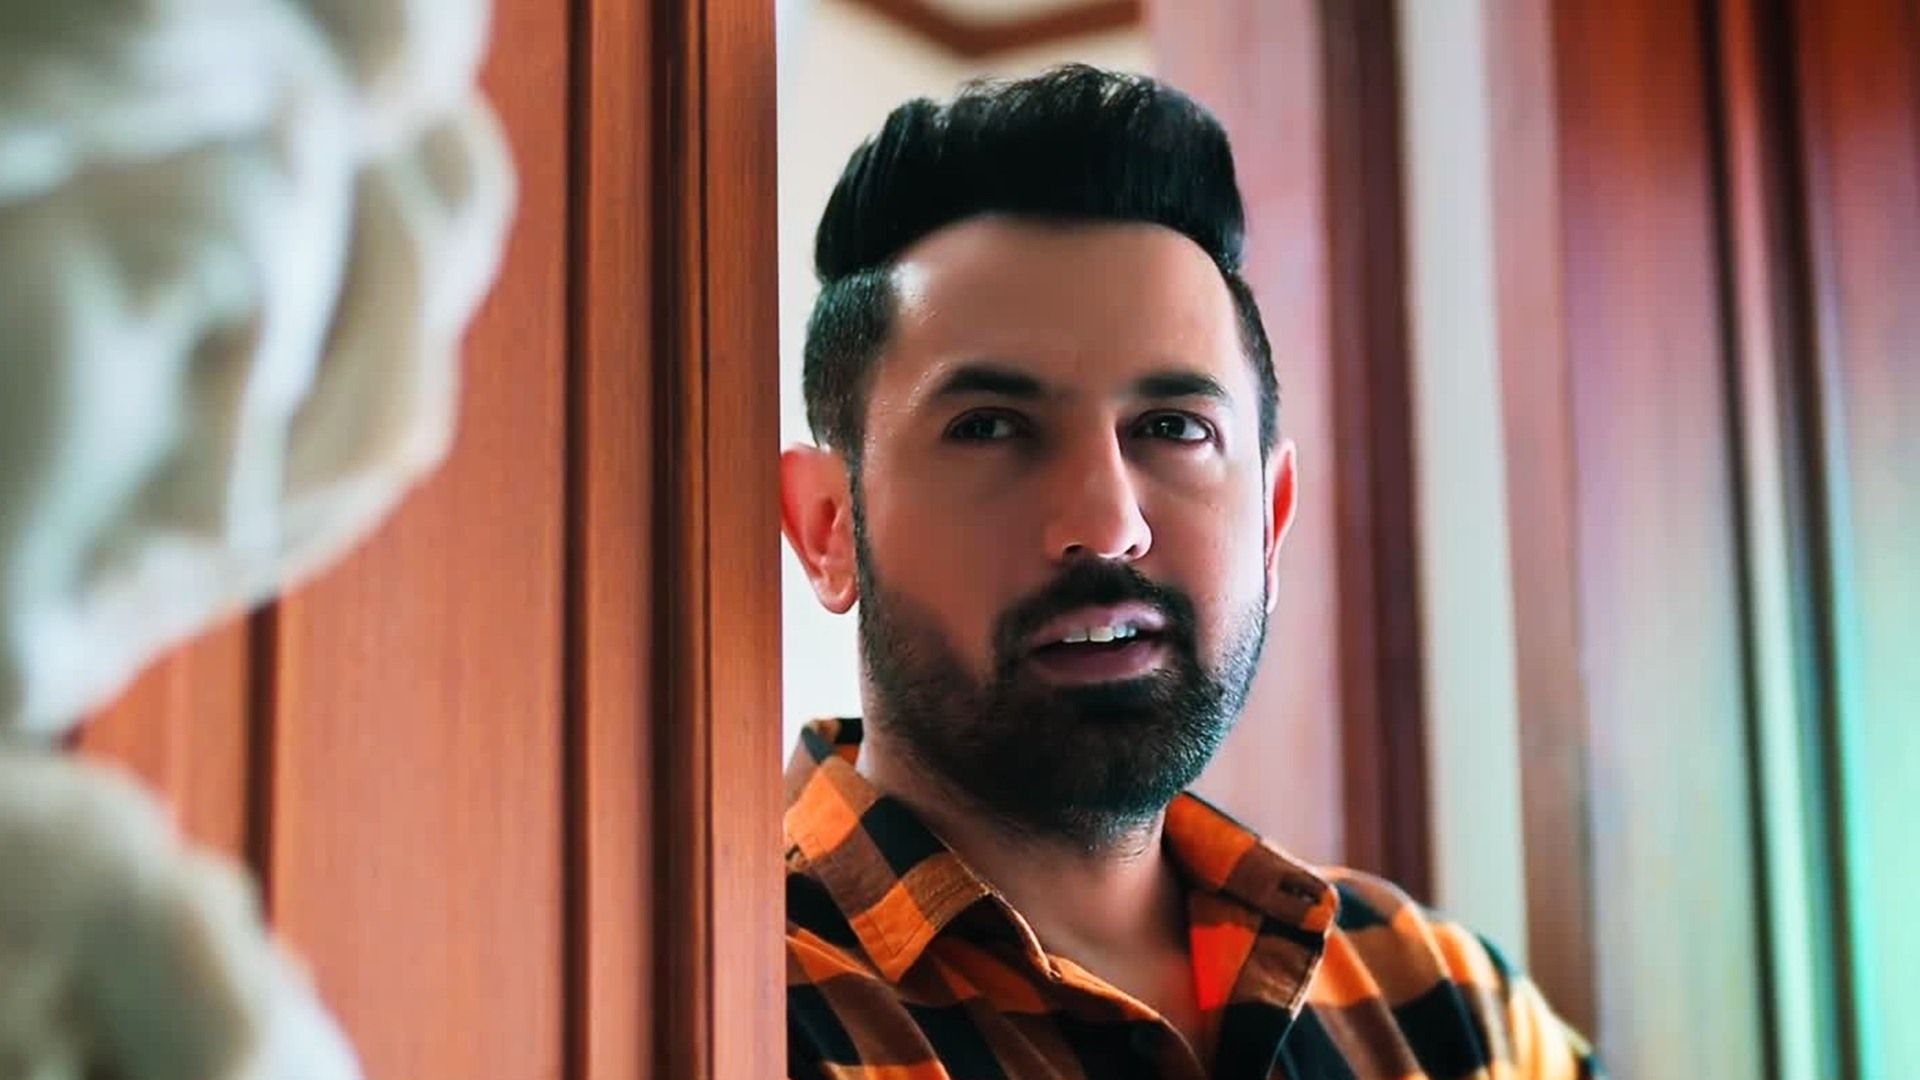 Gippy Grewal song 'Fark': A cautionary tale against drinking and driving